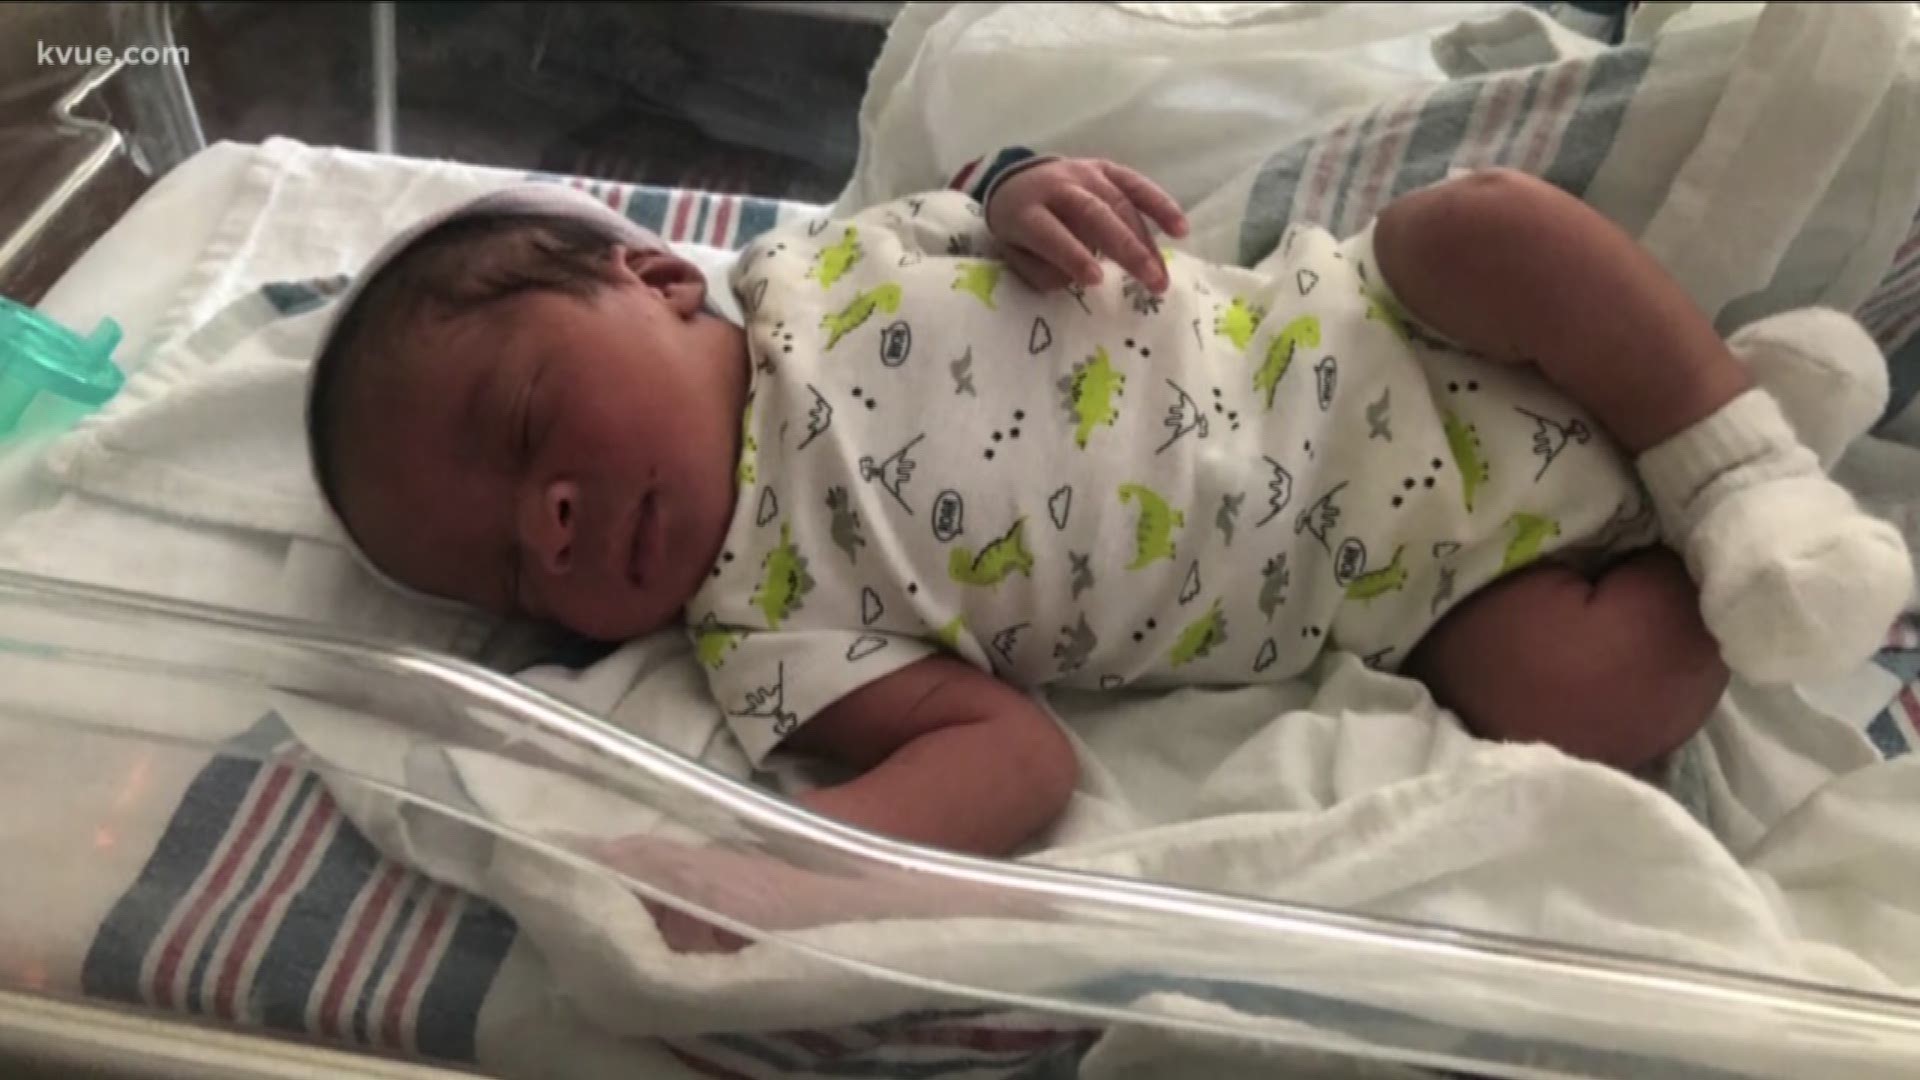 Austin police are still looking for the mother of a baby who triggered an Amber Alert Monday, but one-month-old Elijah Phillips is now in CPS custody.